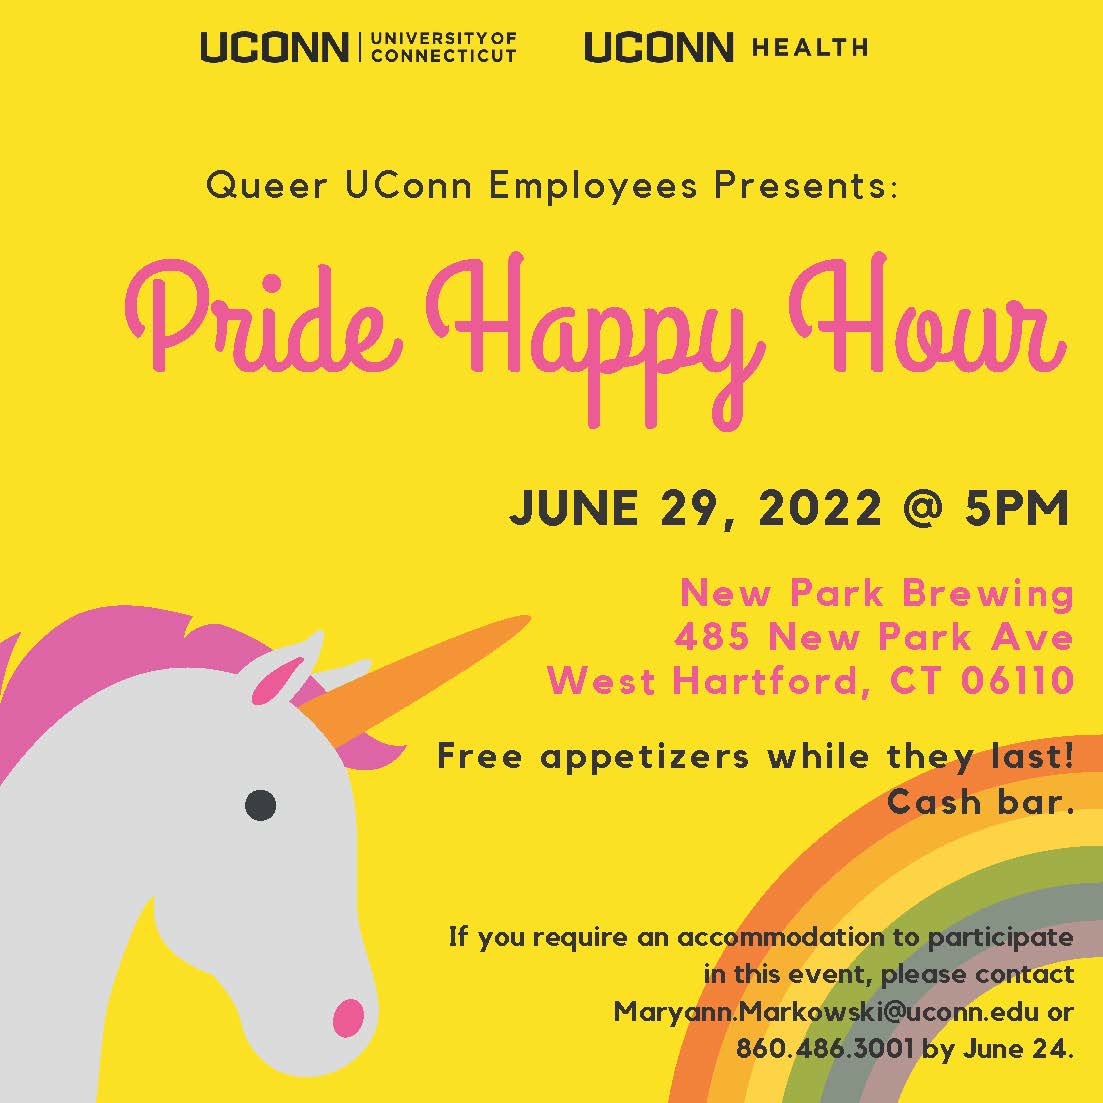 Image button to PDF flyer for June 29, 2022 In-person Pride happy hour